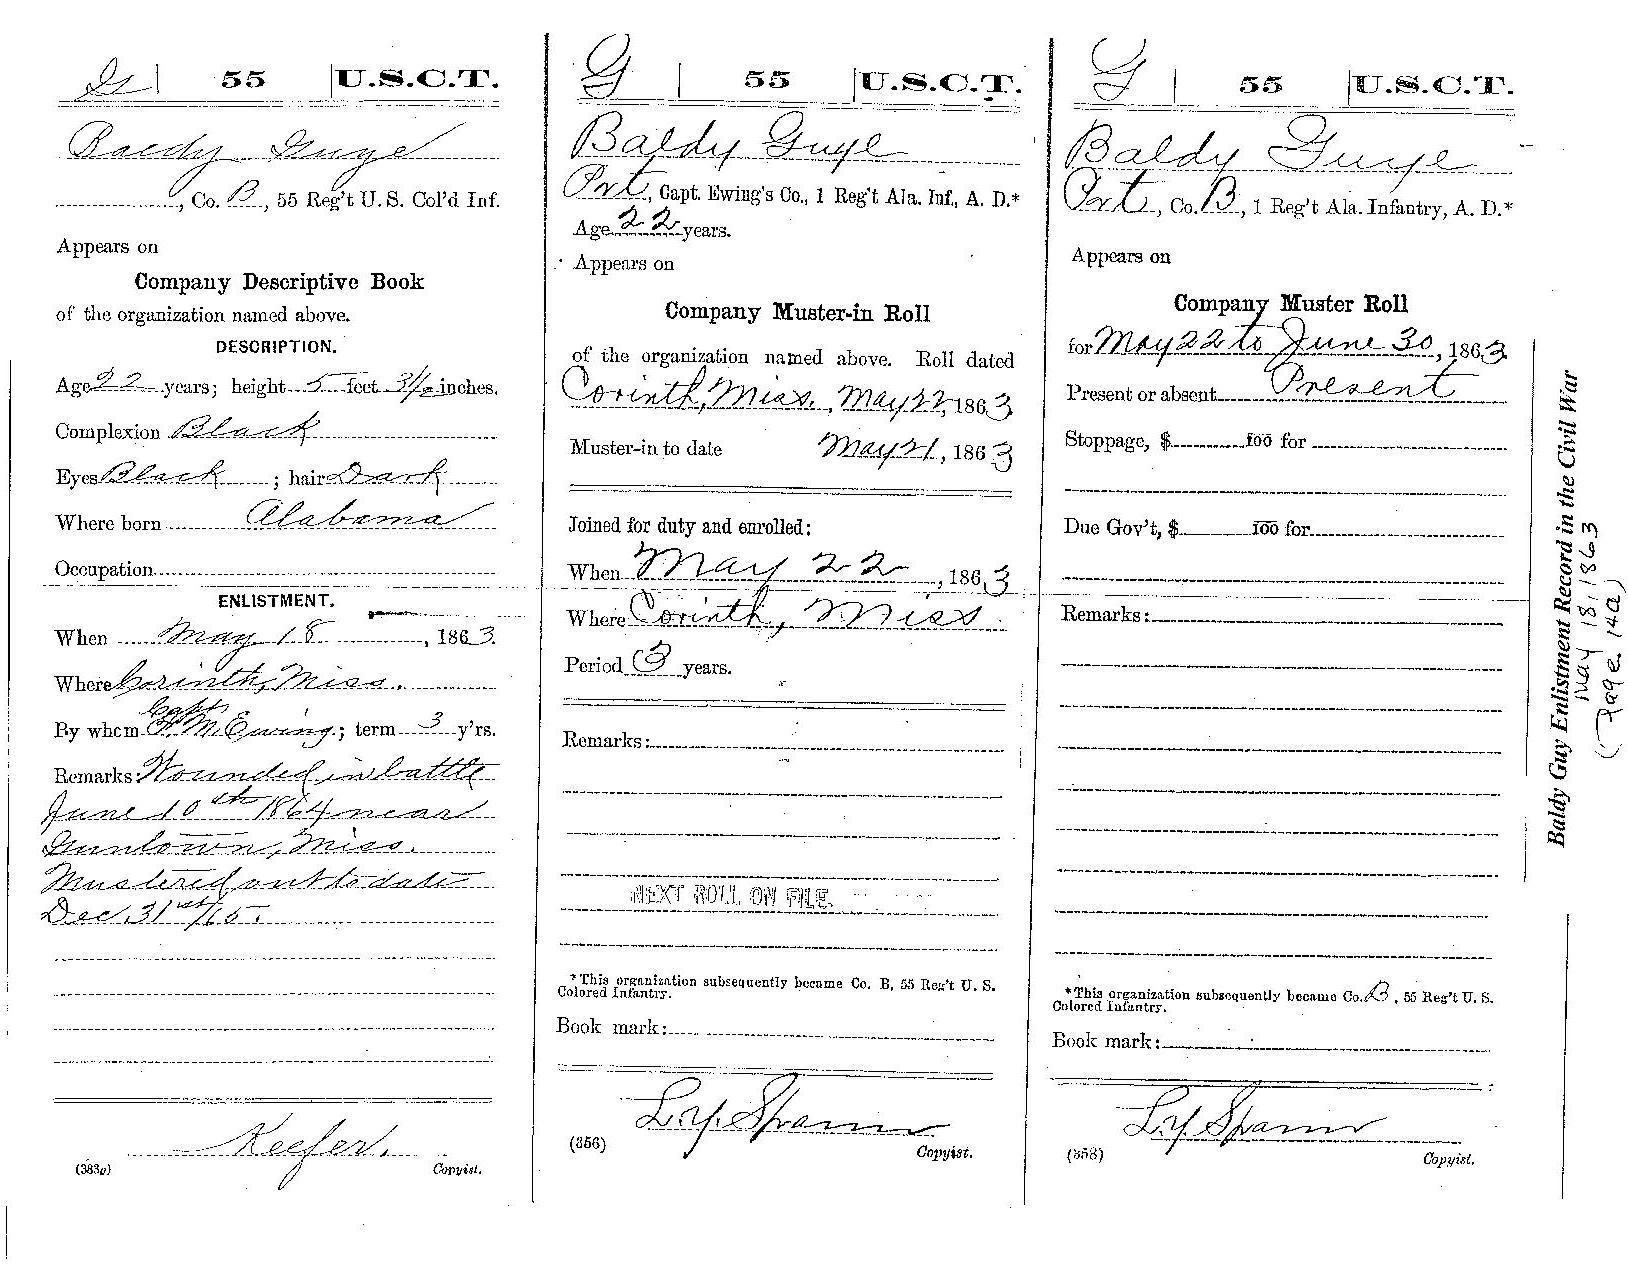 Baldy Guy's Enlistment Record in the Civil War May 18, 1863